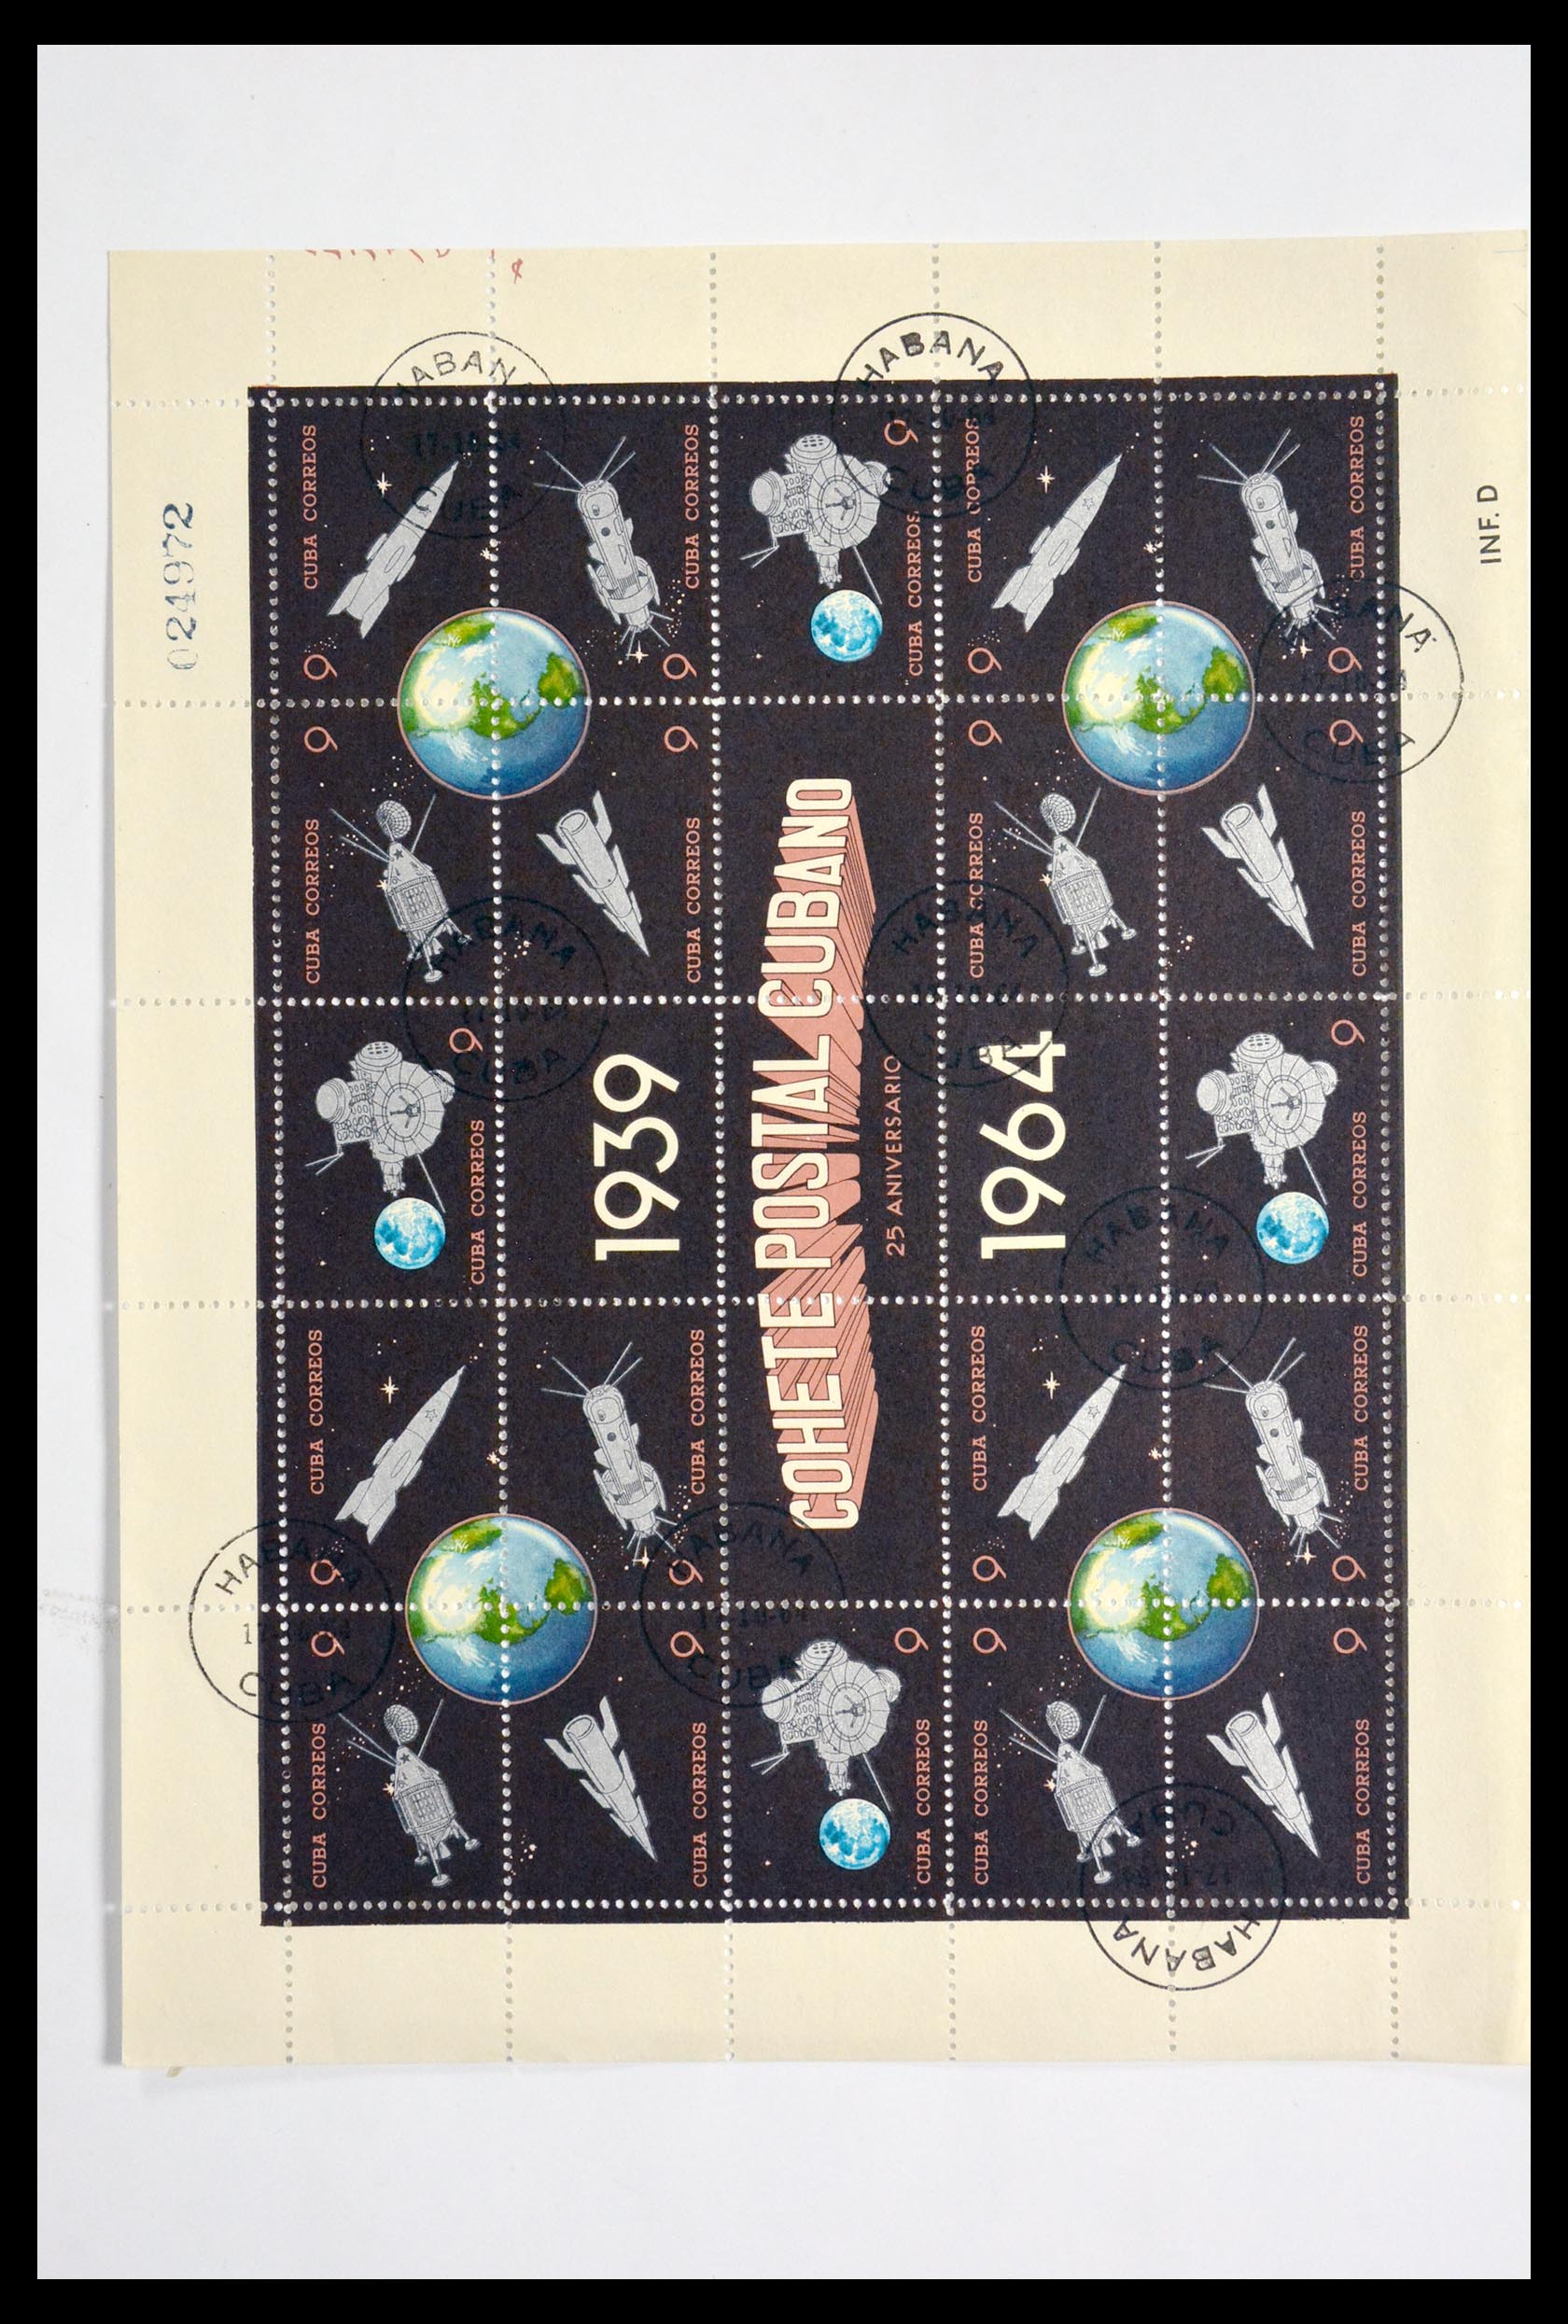 29917 069 - 29917 Latin America airmail stamps.